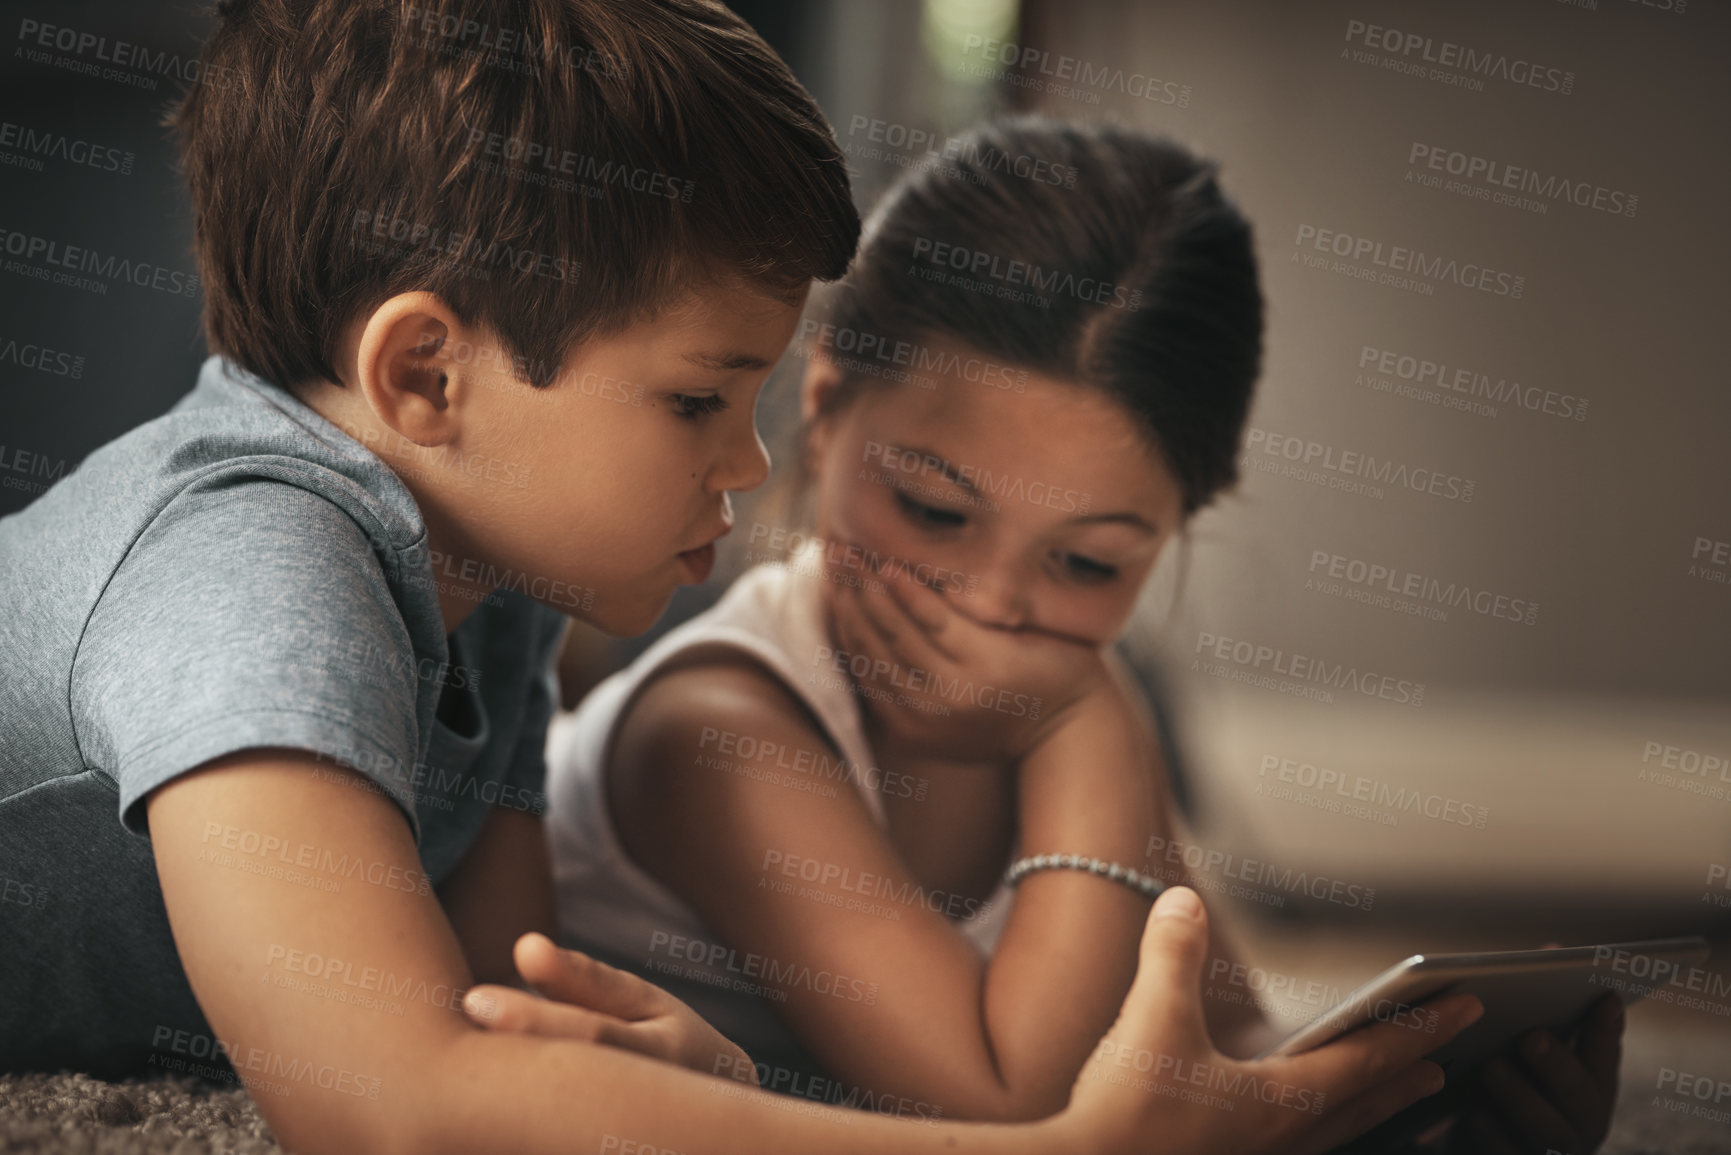 Buy stock photo Shot of an adorable brother and sister using a digital tablet together on the floor at home